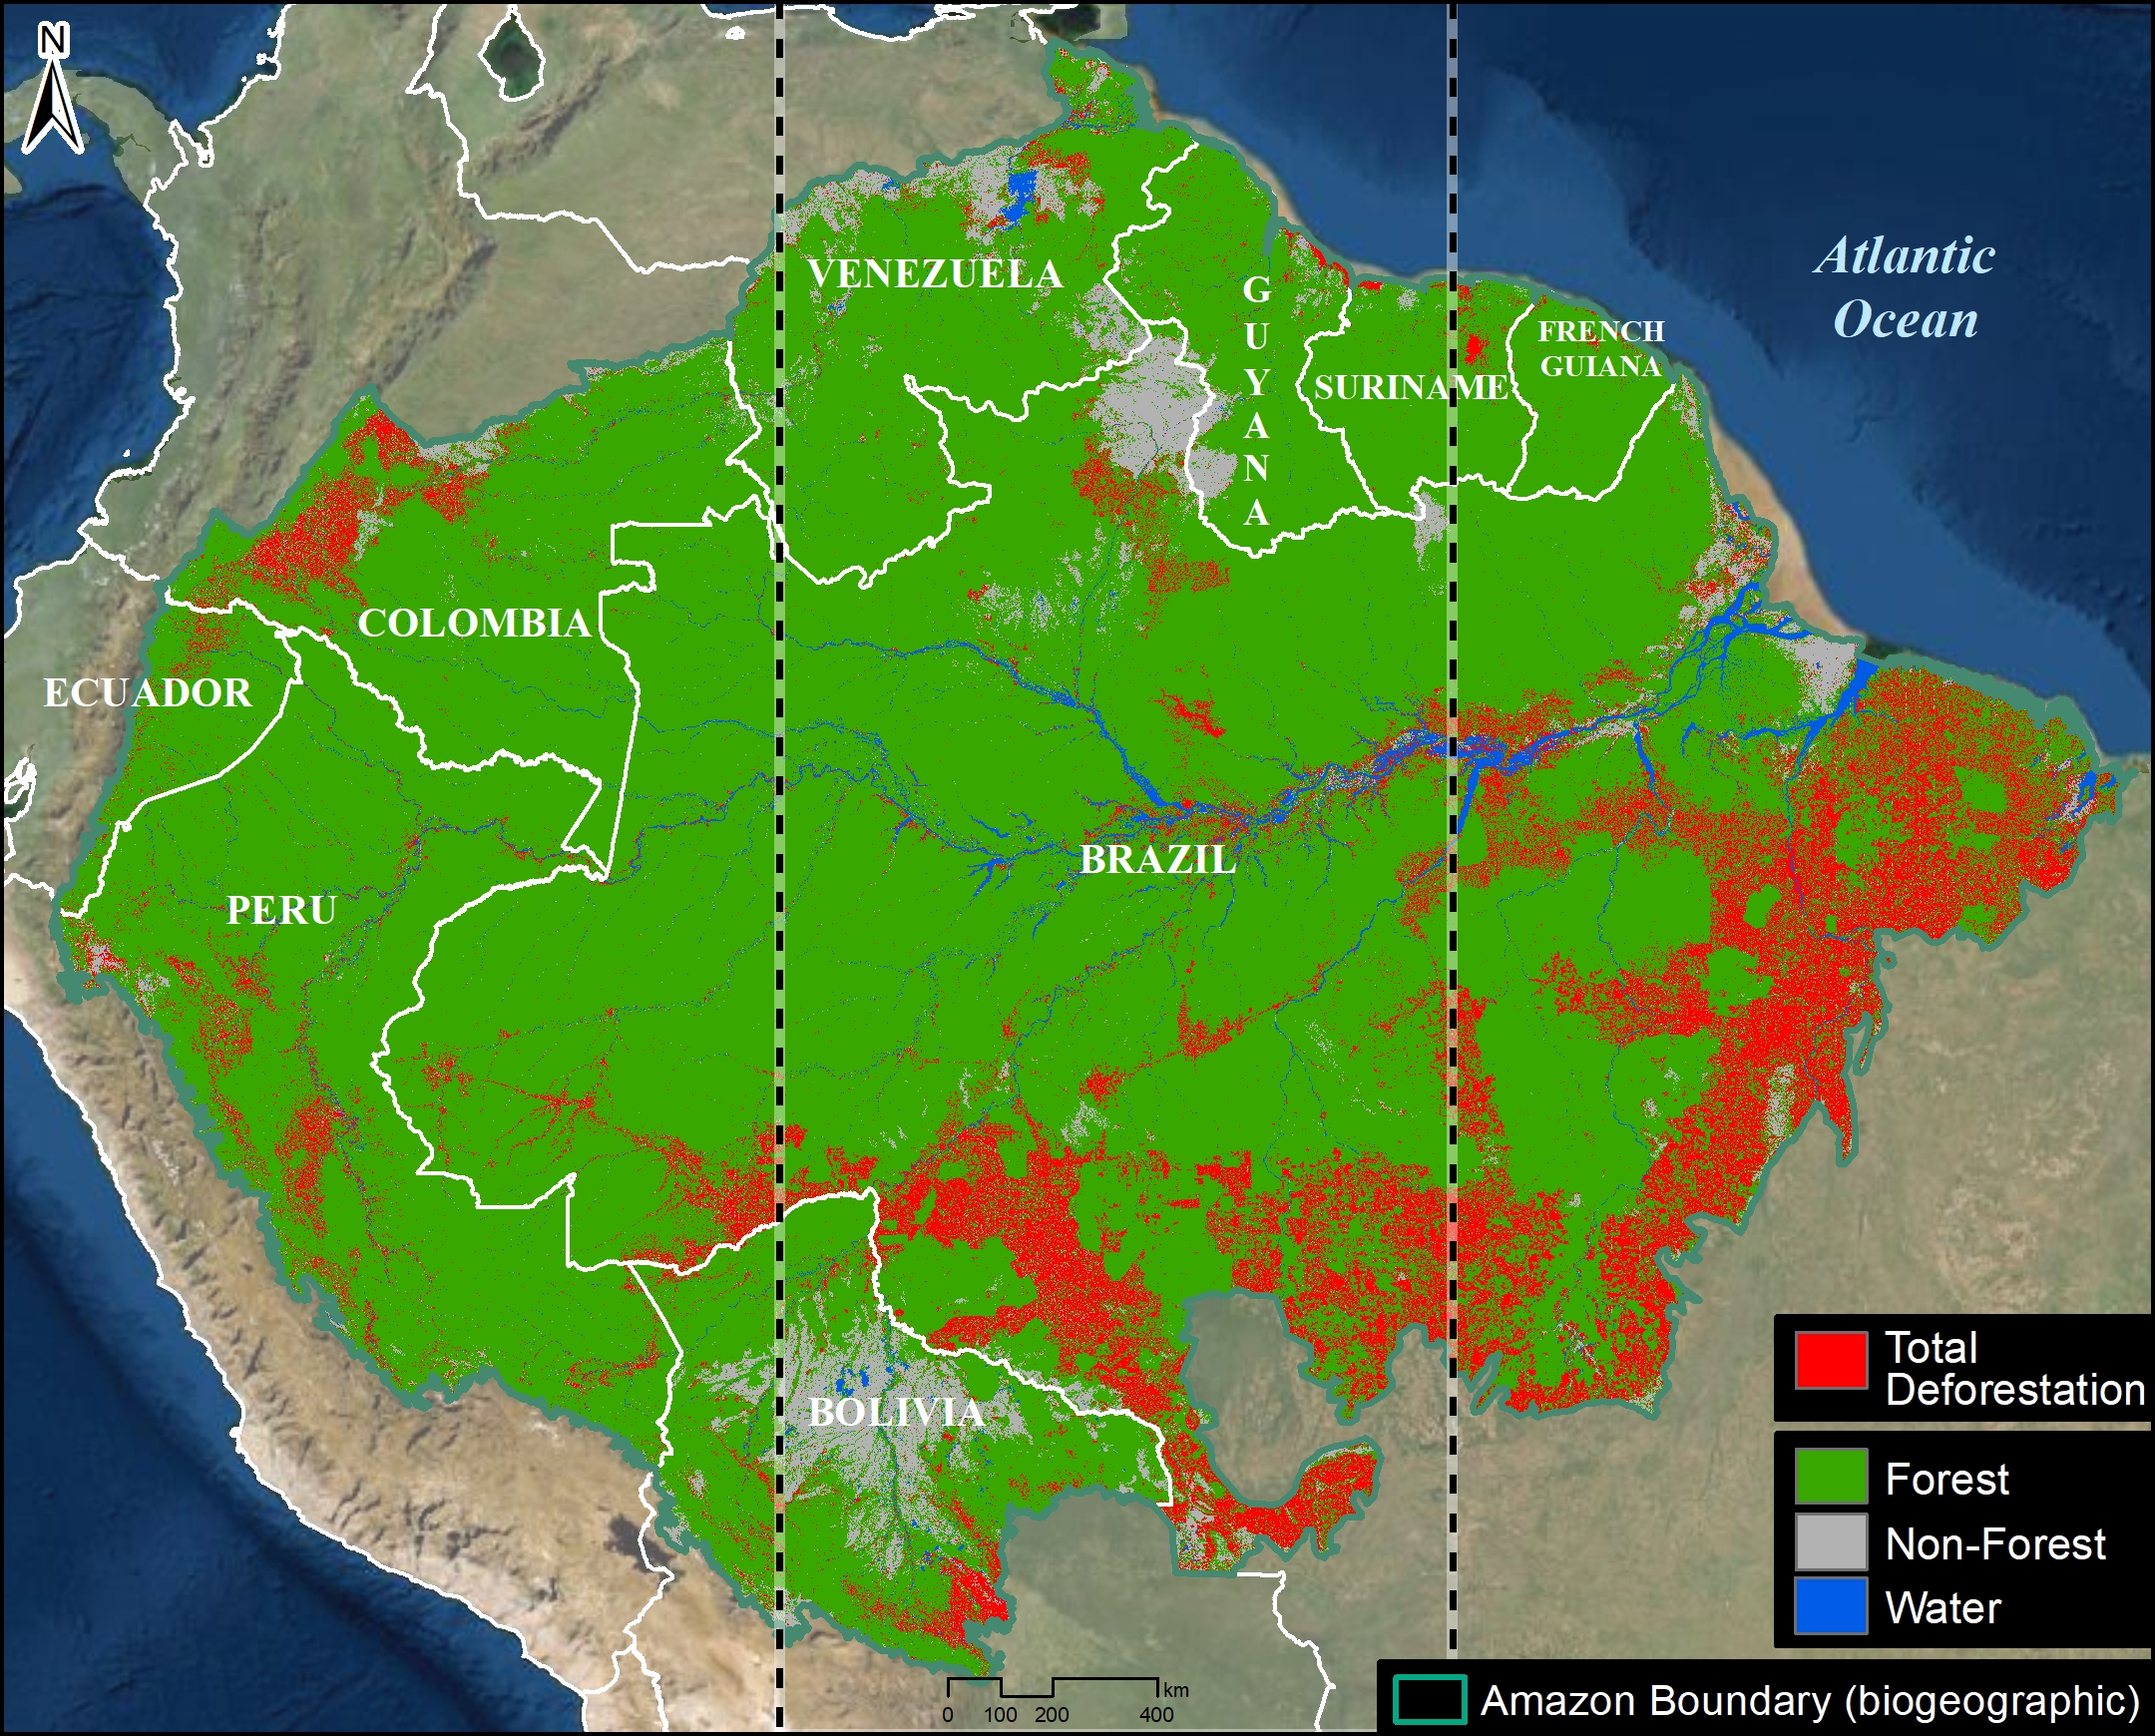 Total Amazon forest loss. Vertical lines indicate the Amazon split into thirds; 31% of the eastern Amazon has been lost to deforestation and other causes. Data from Amazon Conservation Association and MAAP.